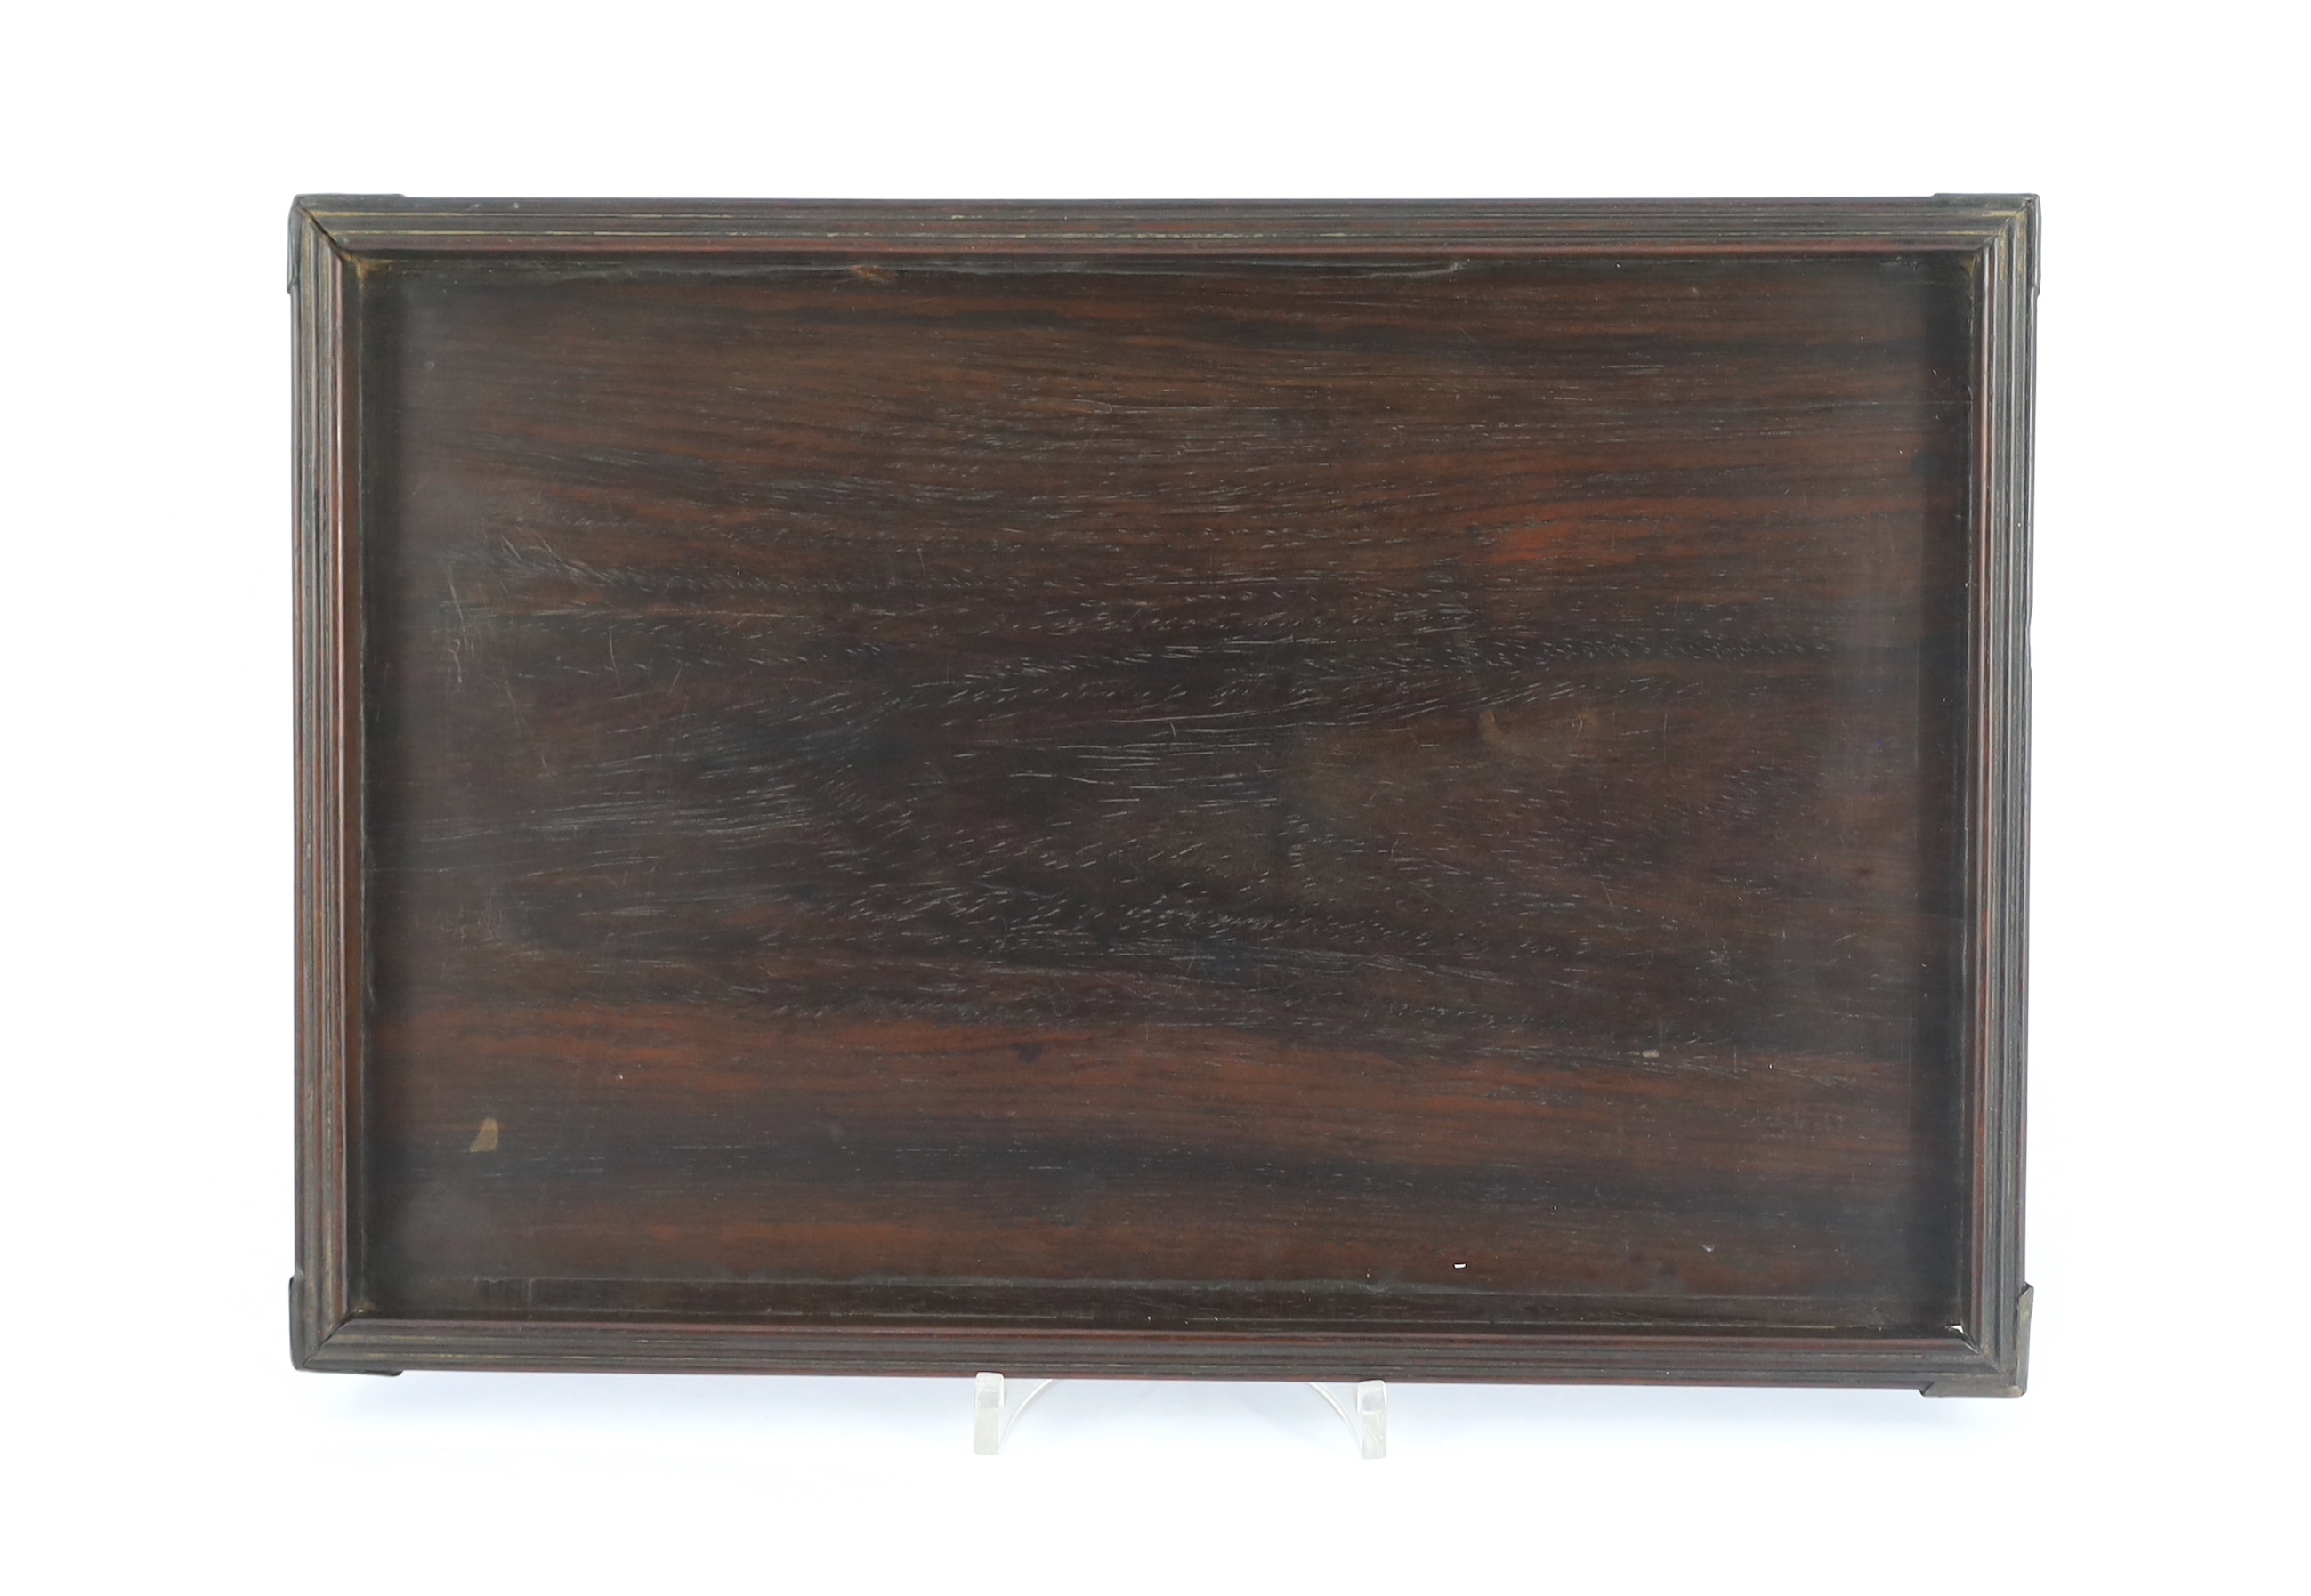 A Chinese hardwood rectangular tray, Qing dynasty, possibly Zitan, with brass mounted corners and reeded edges, 35.5cm x 23.5cm, old splits and repairs